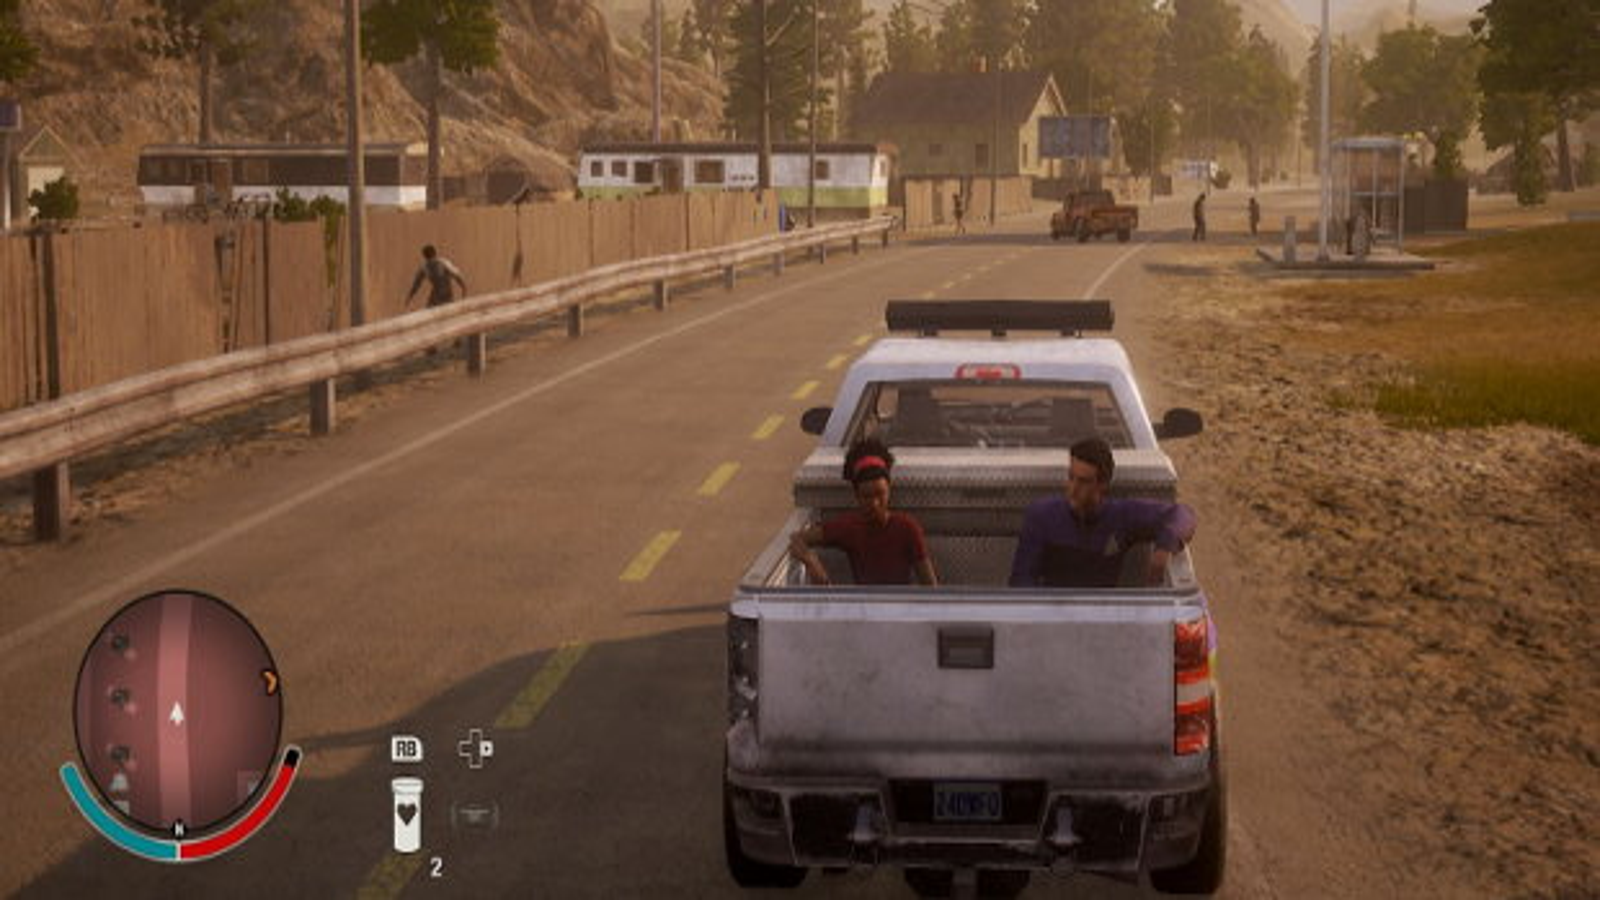 100+] State Of Decay 2 Wallpapers